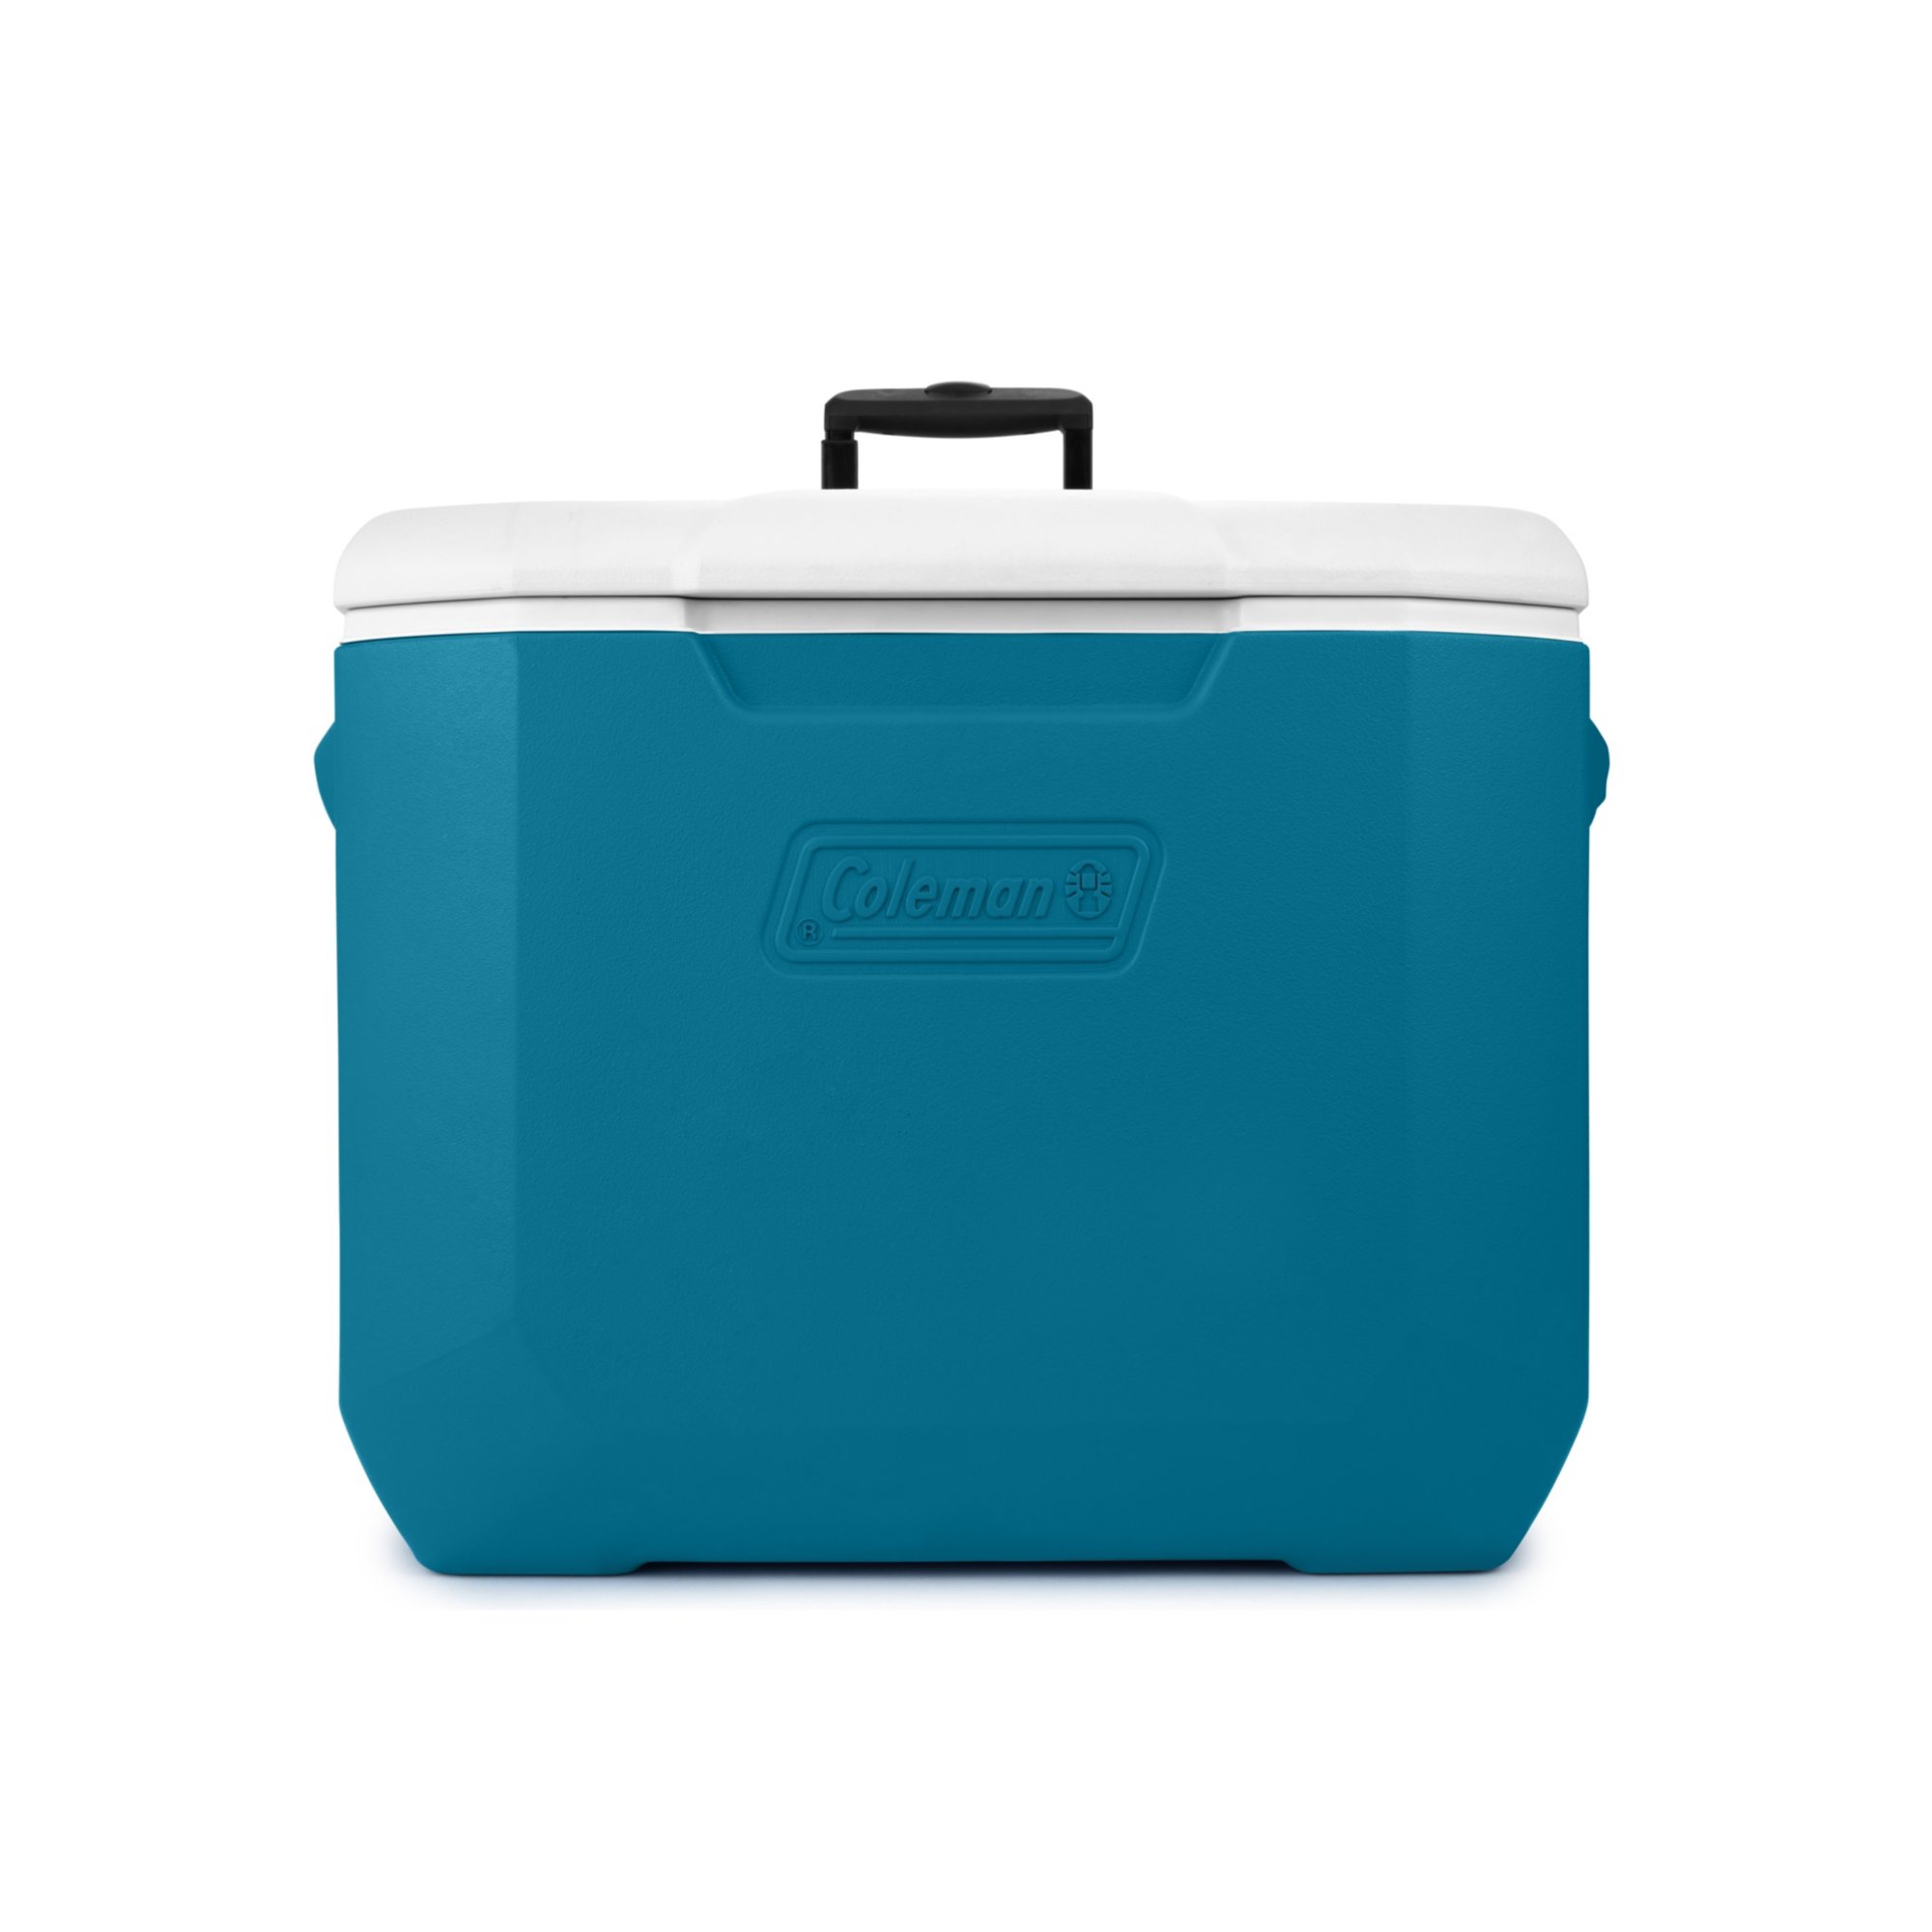 Rubbermaid Personal Vintage Lunch Box Teal and White Hard Plastic Lunch Box  Lunchbox With Hard Plastic Handle Cooler Personal Size 